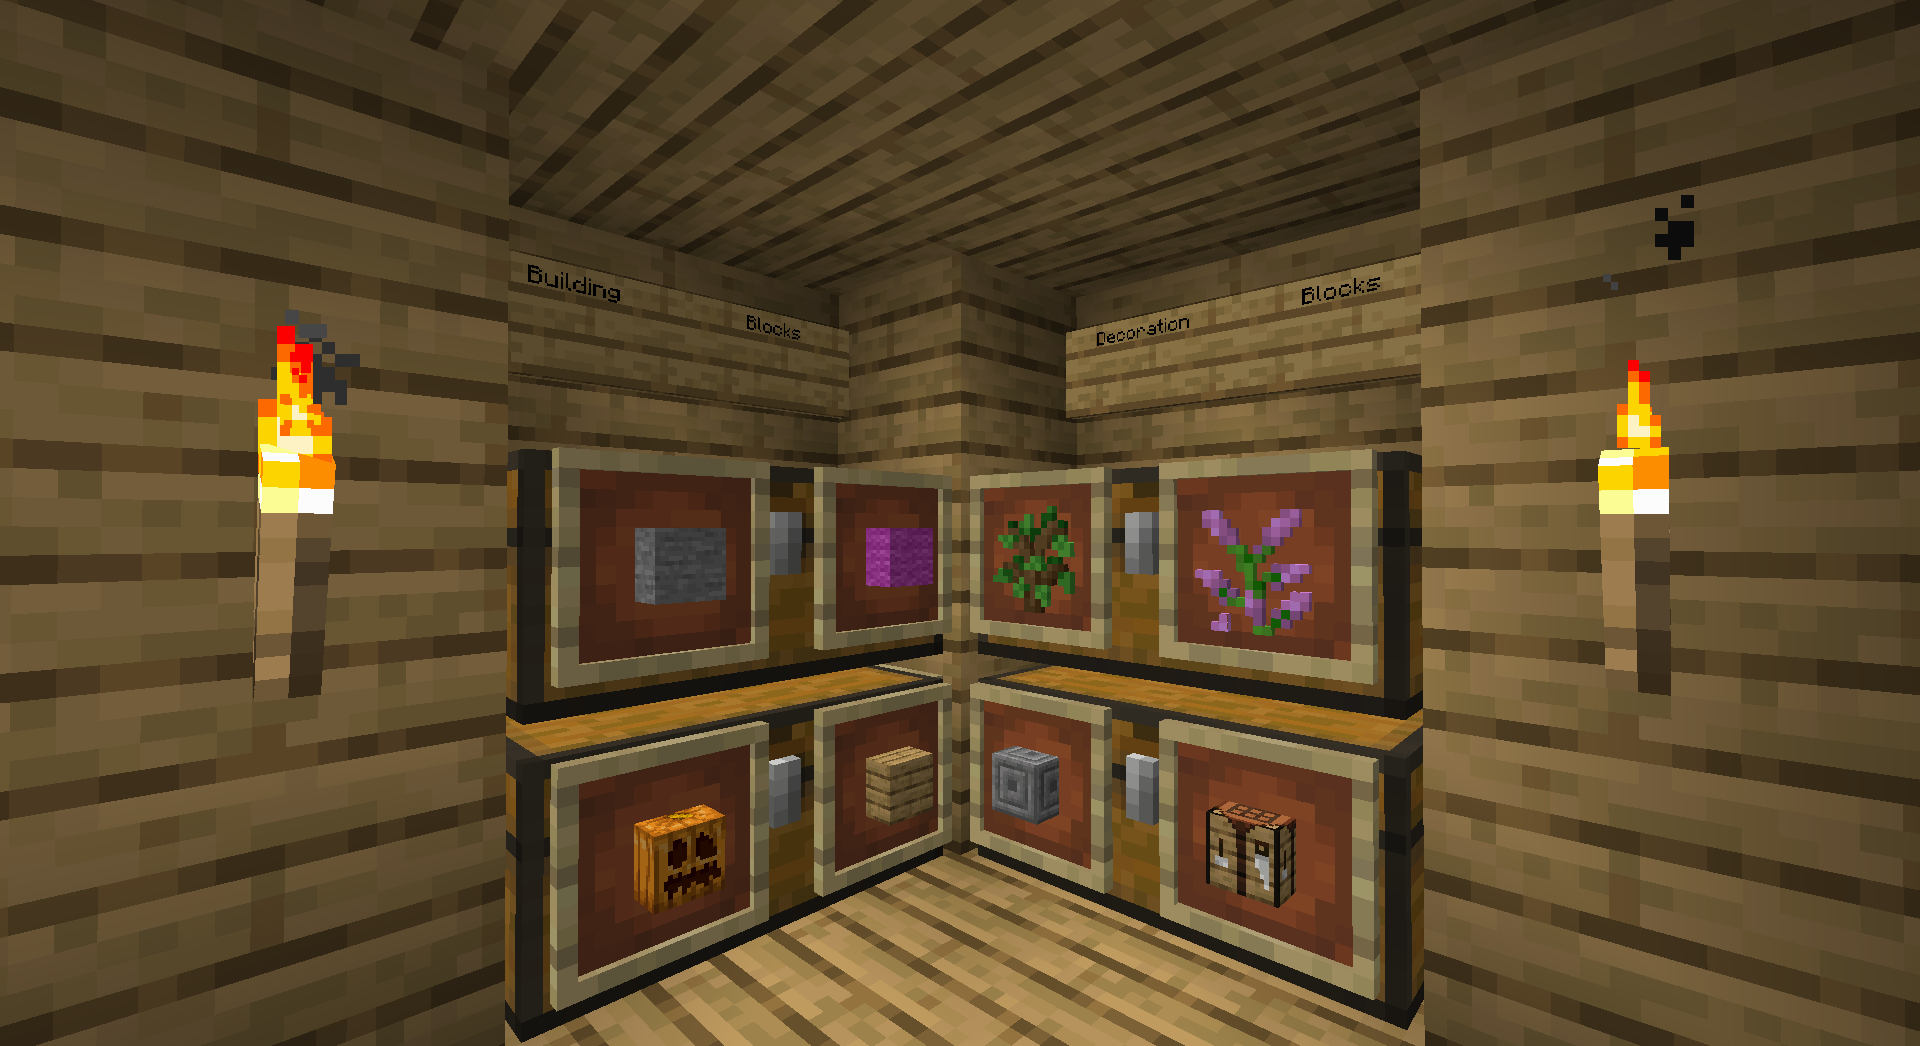 How to Make an Ender Chest in Minecraft: 10 Steps (with Pictures)